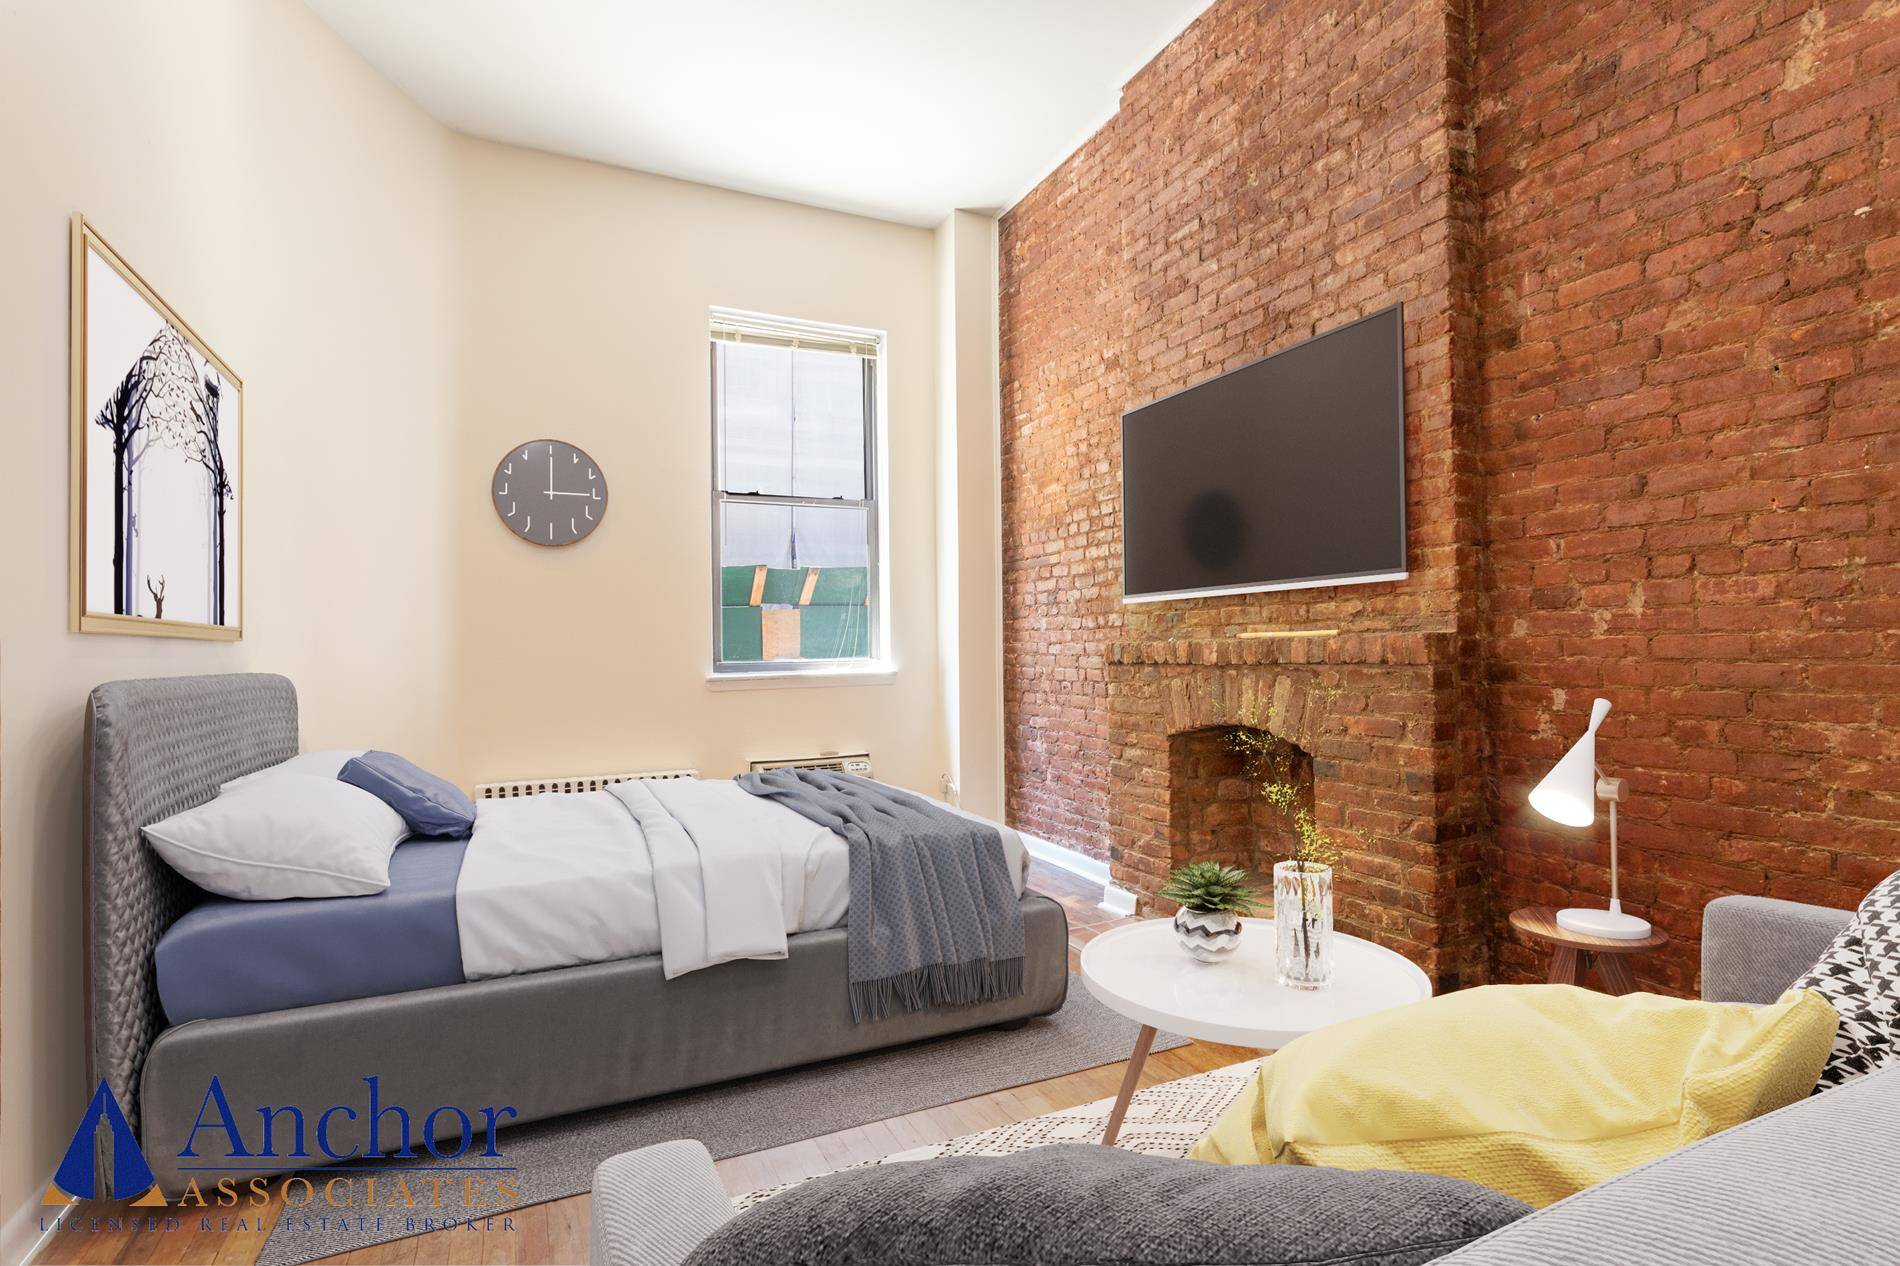 This is a RENT STABILIZED spacious studio in one of the most highly desired areas in Union Square Gramercy.